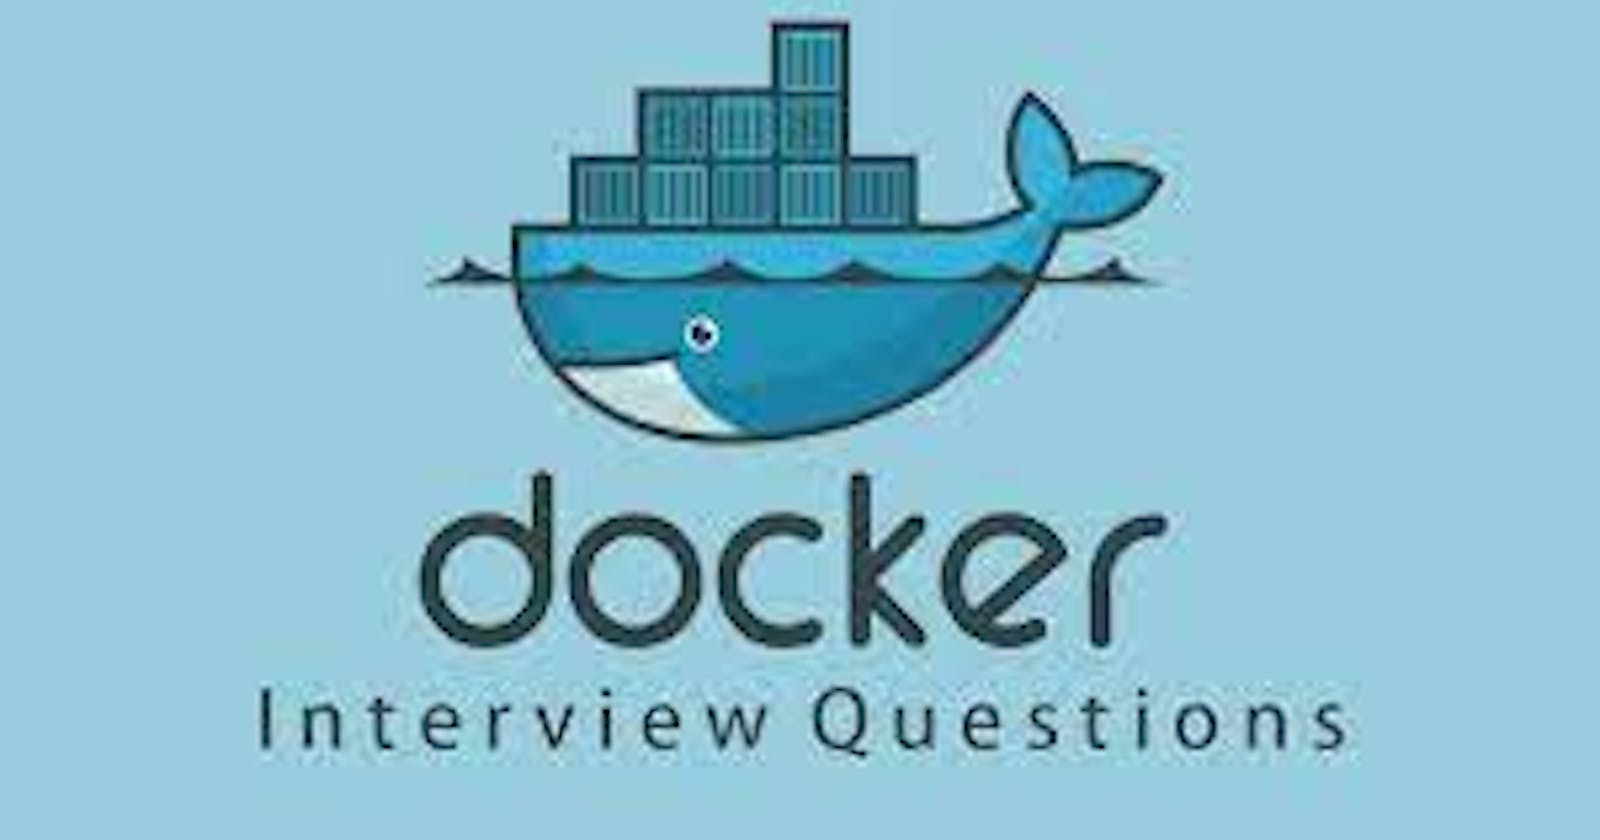 Day 21 Task: Docker Important interview Questions.